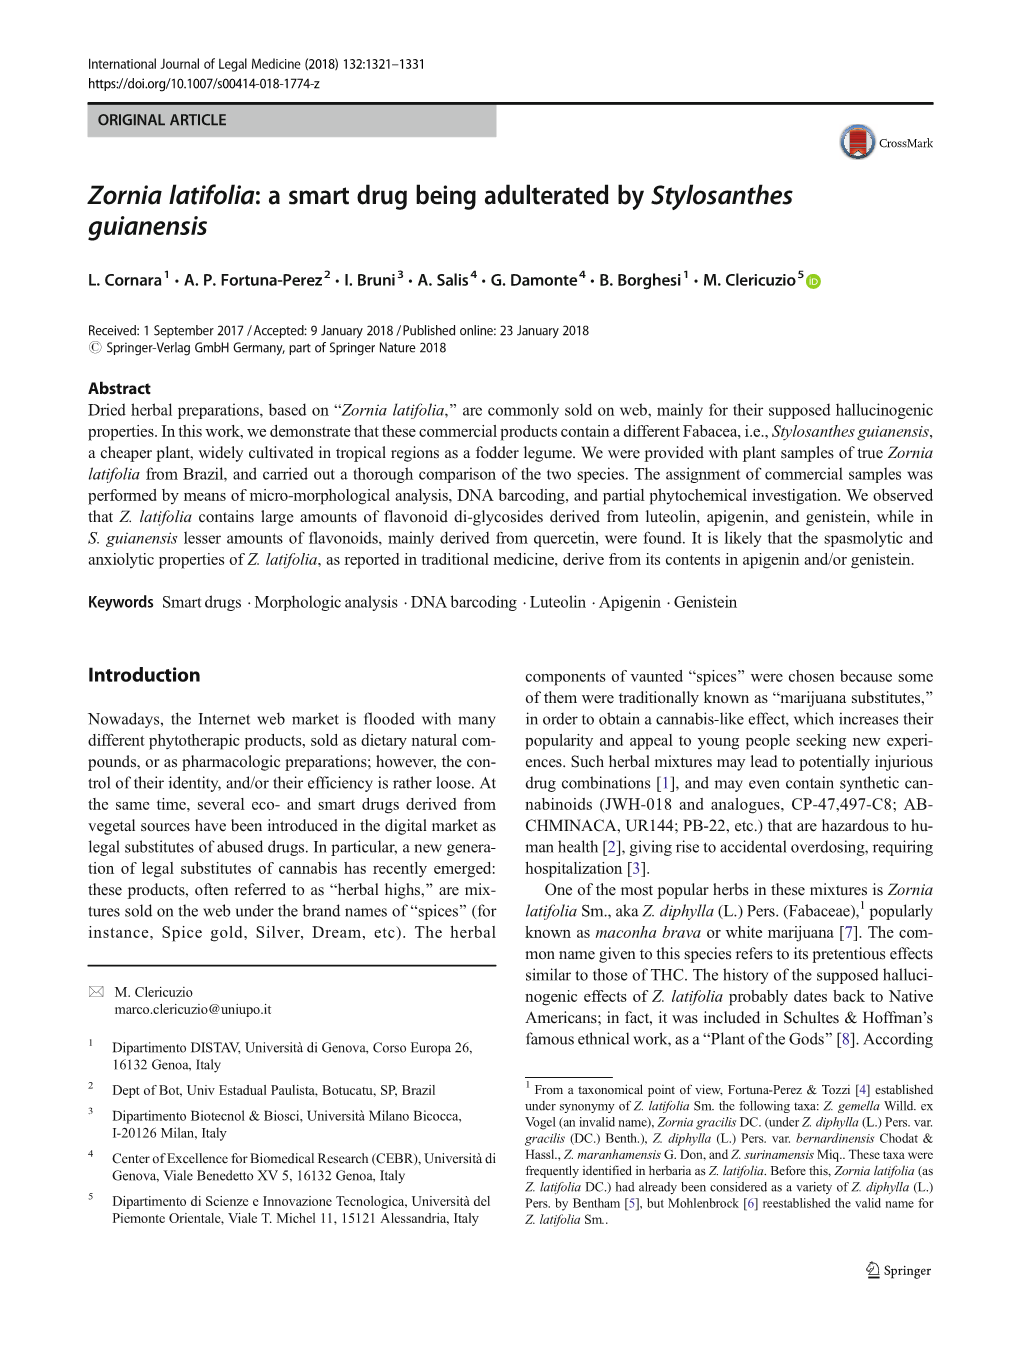 Zornia Latifolia: a Smart Drug Being Adulterated by Stylosanthes Guianensis